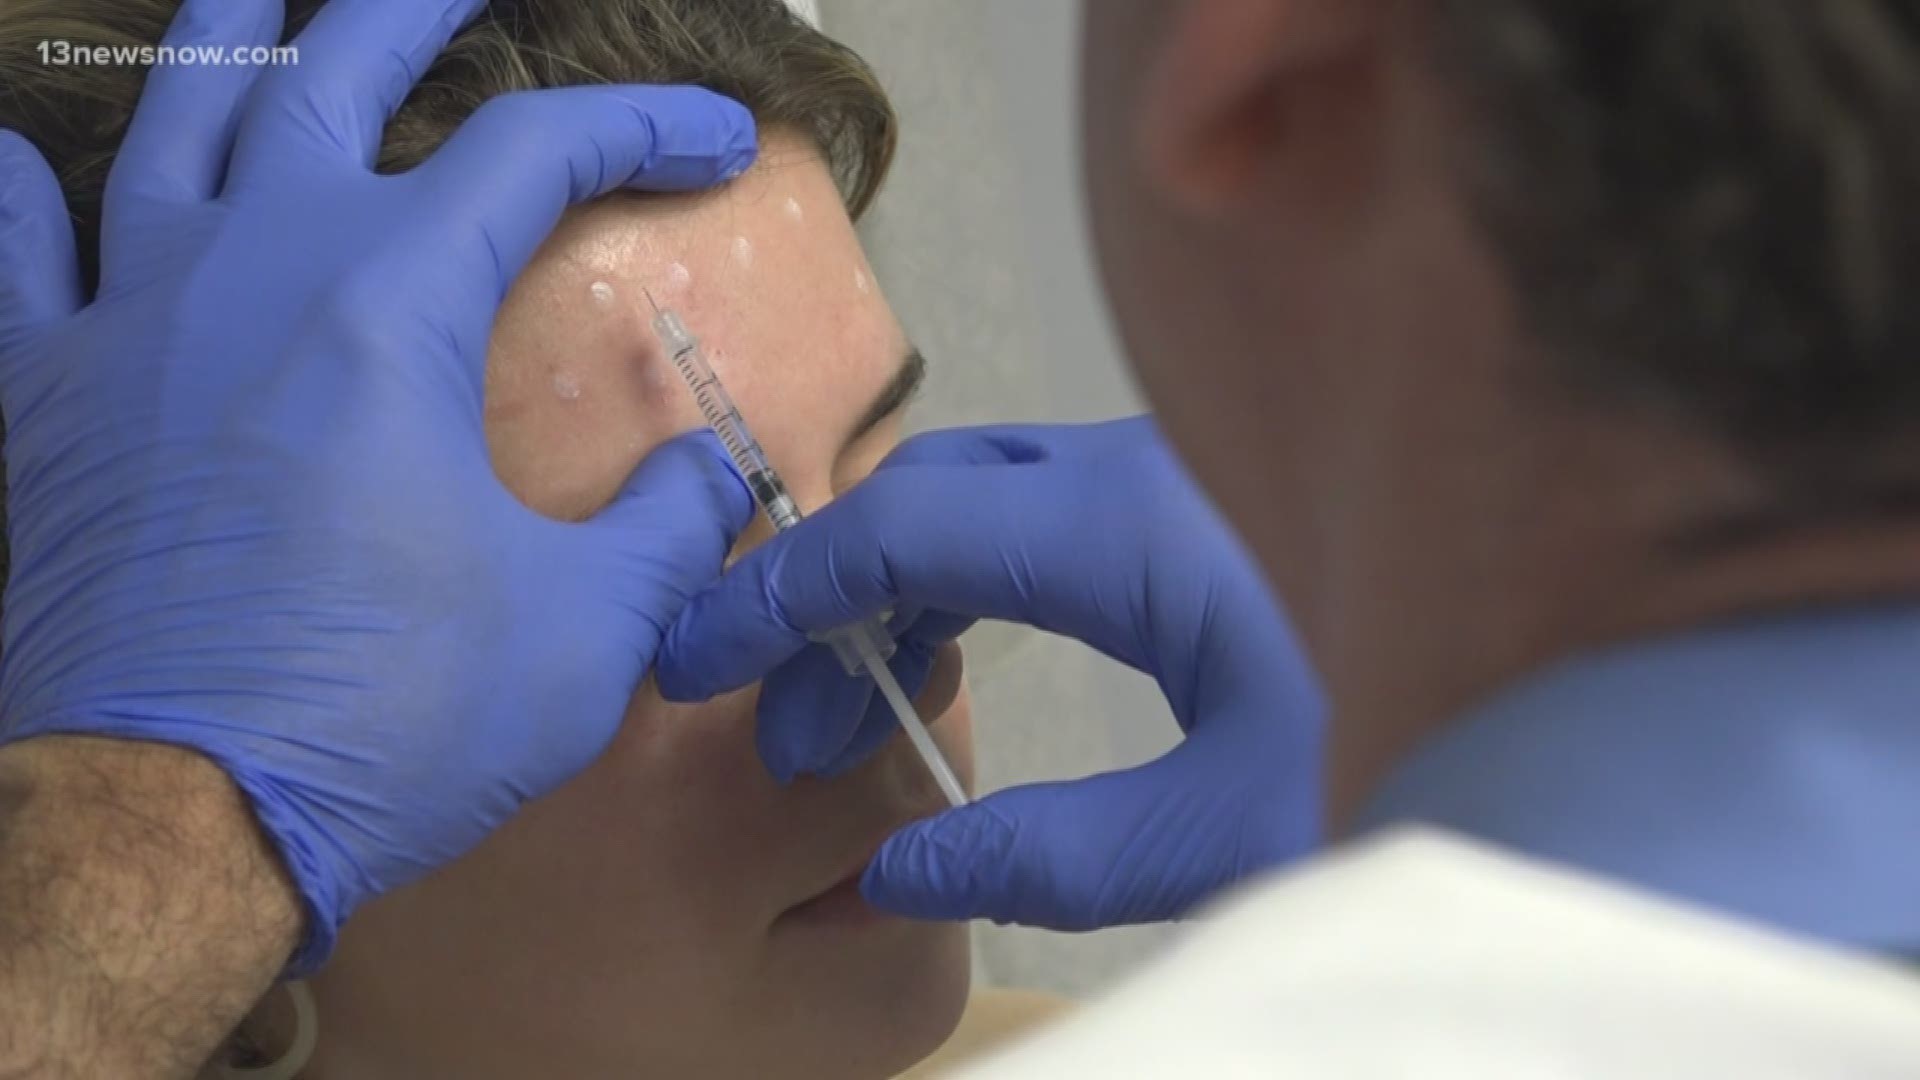 Doctors have seen an increase in Botox injections in women in their 20s and 30s.